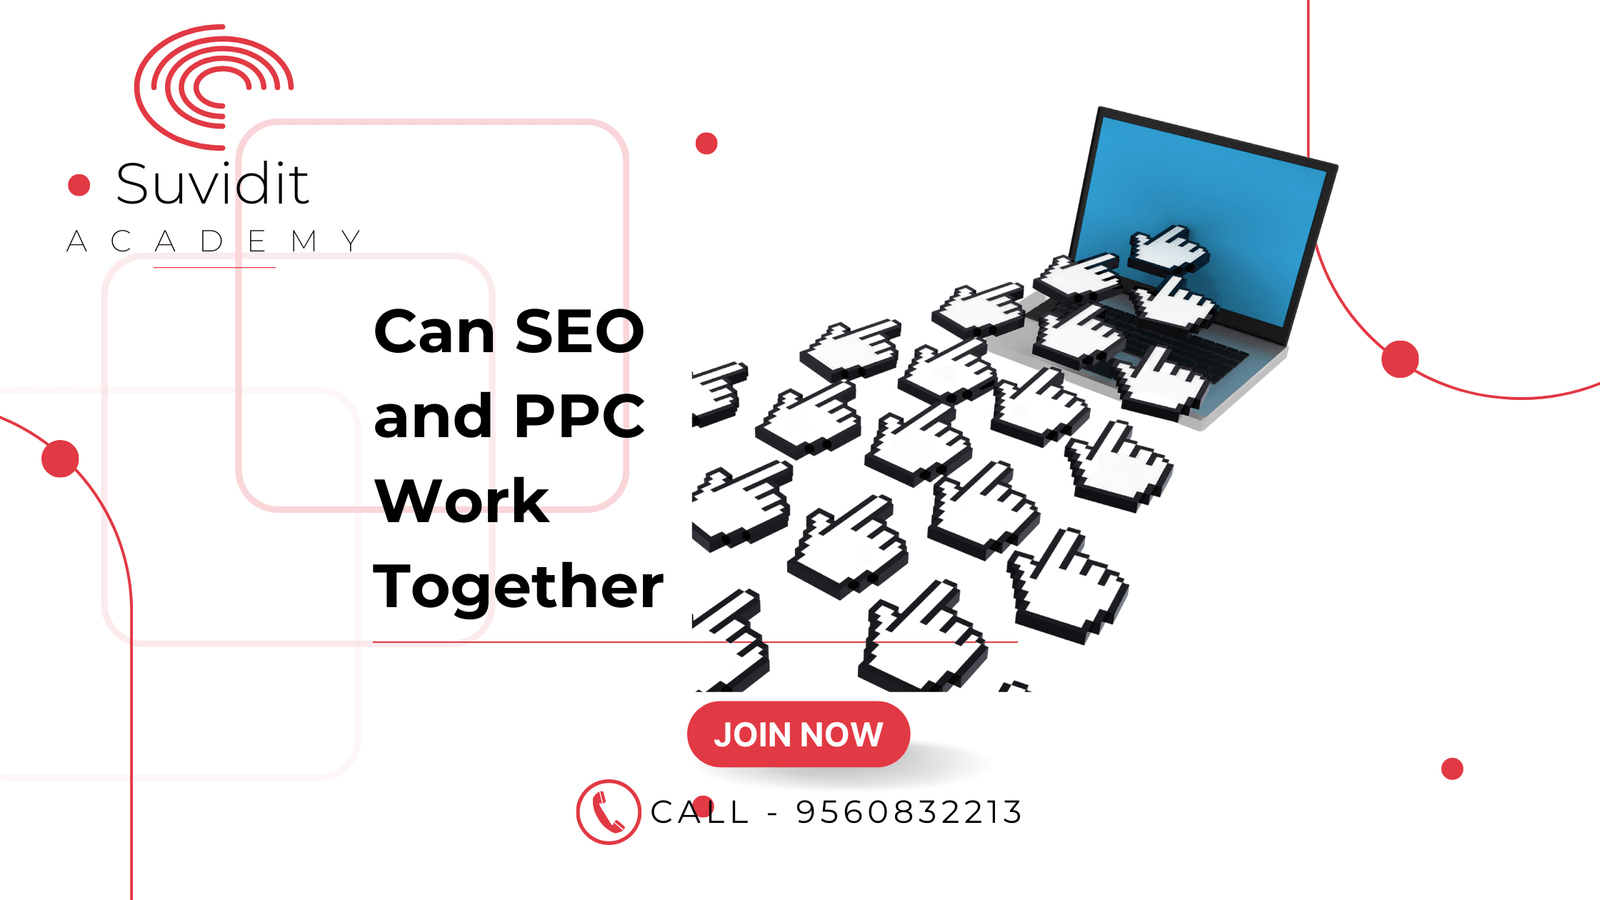 Can SEO and PPC Work Together